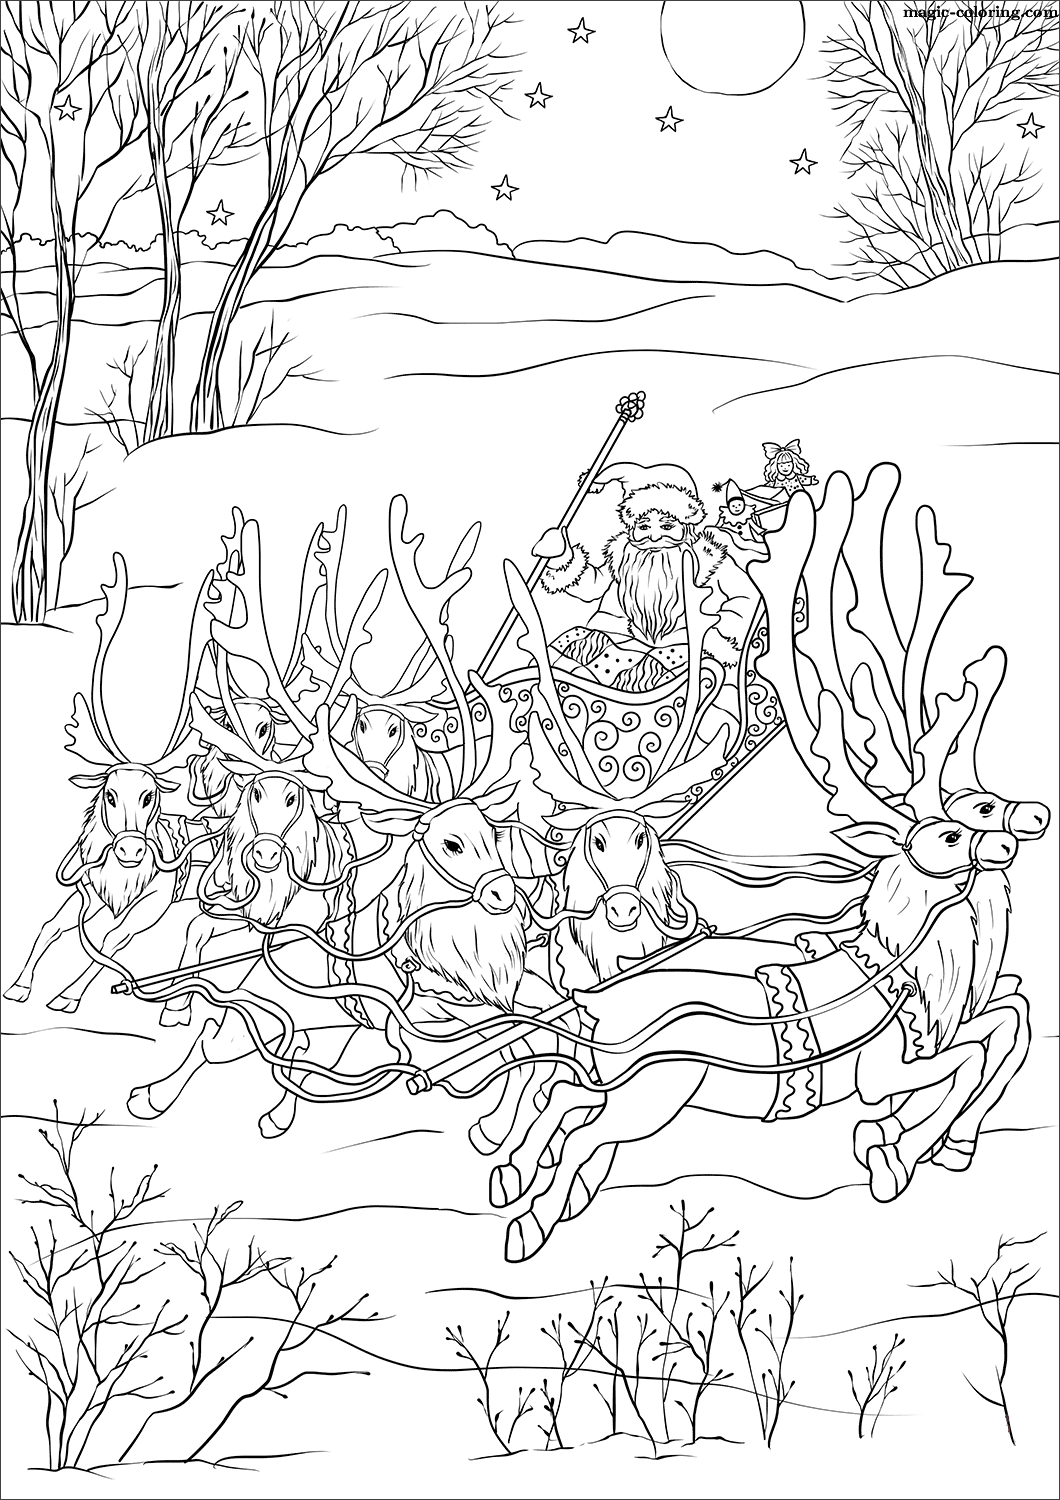 Miniature Sleigh, Eight Tiny Reindeer and St. Nickolas Coloring Page